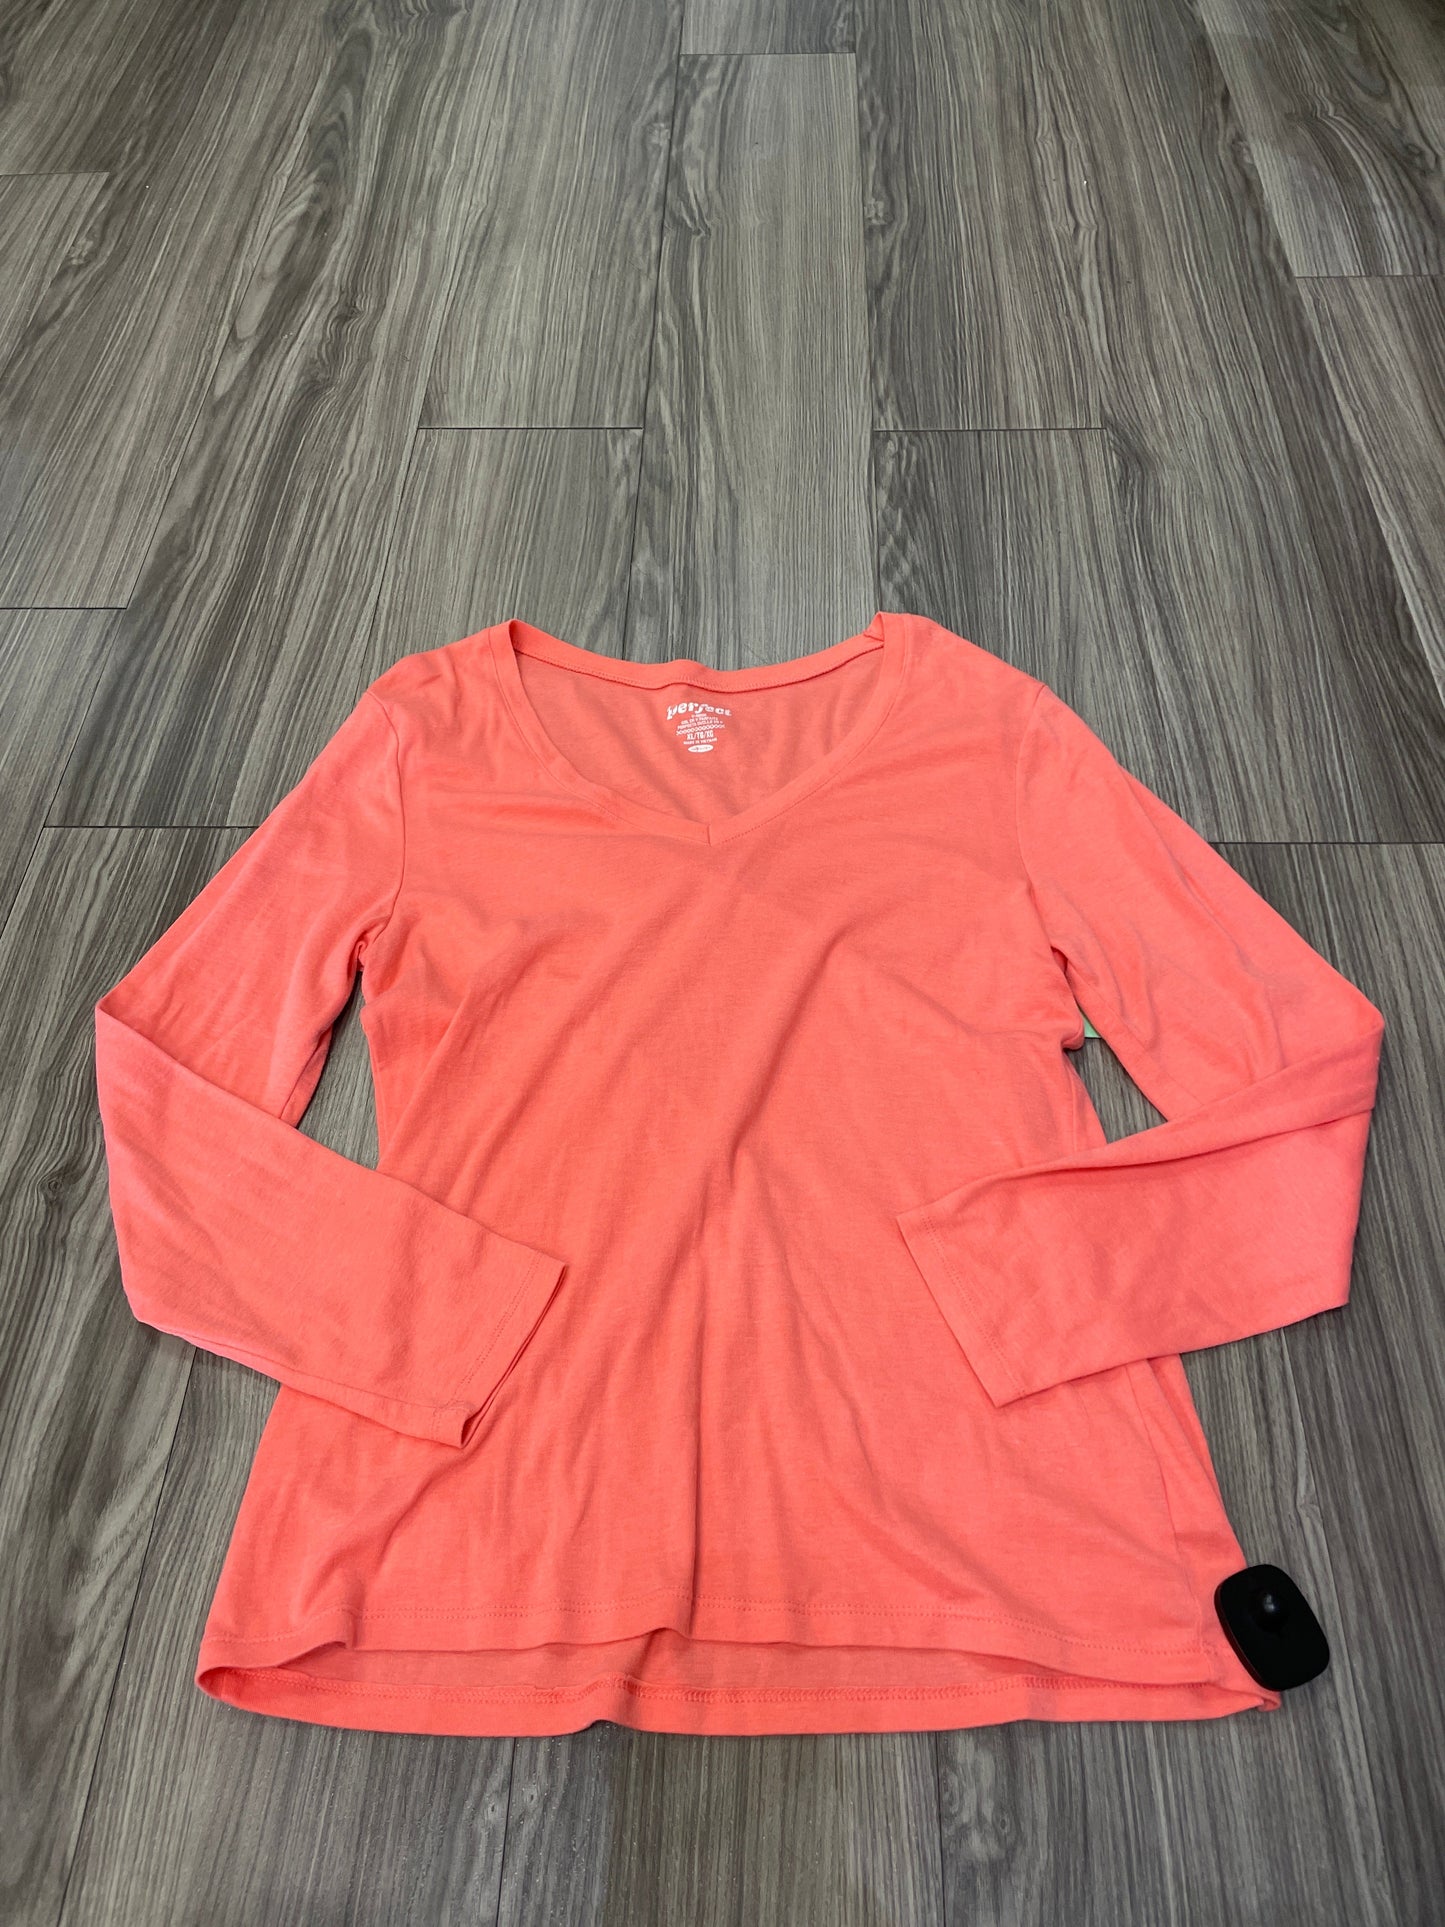 Coral Top Long Sleeve Old Navy, Size Xl